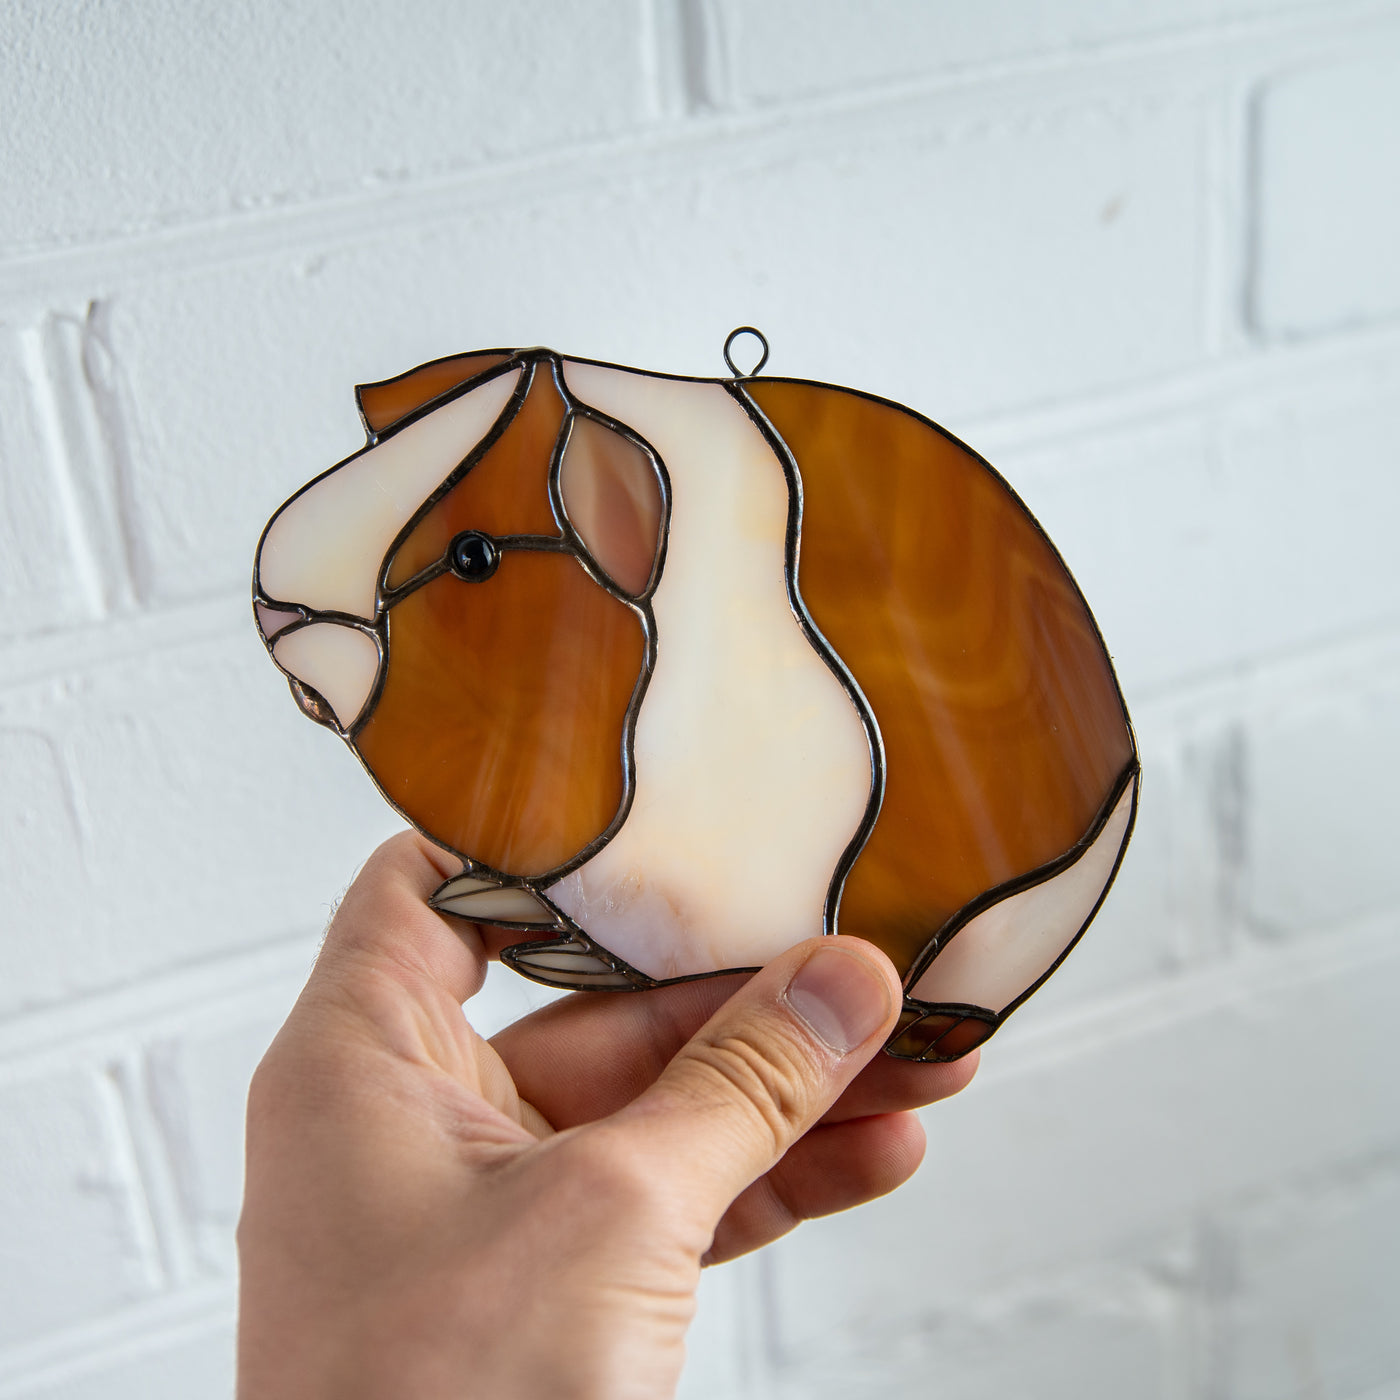 Suncatcher of a stained glass guinea pig for window